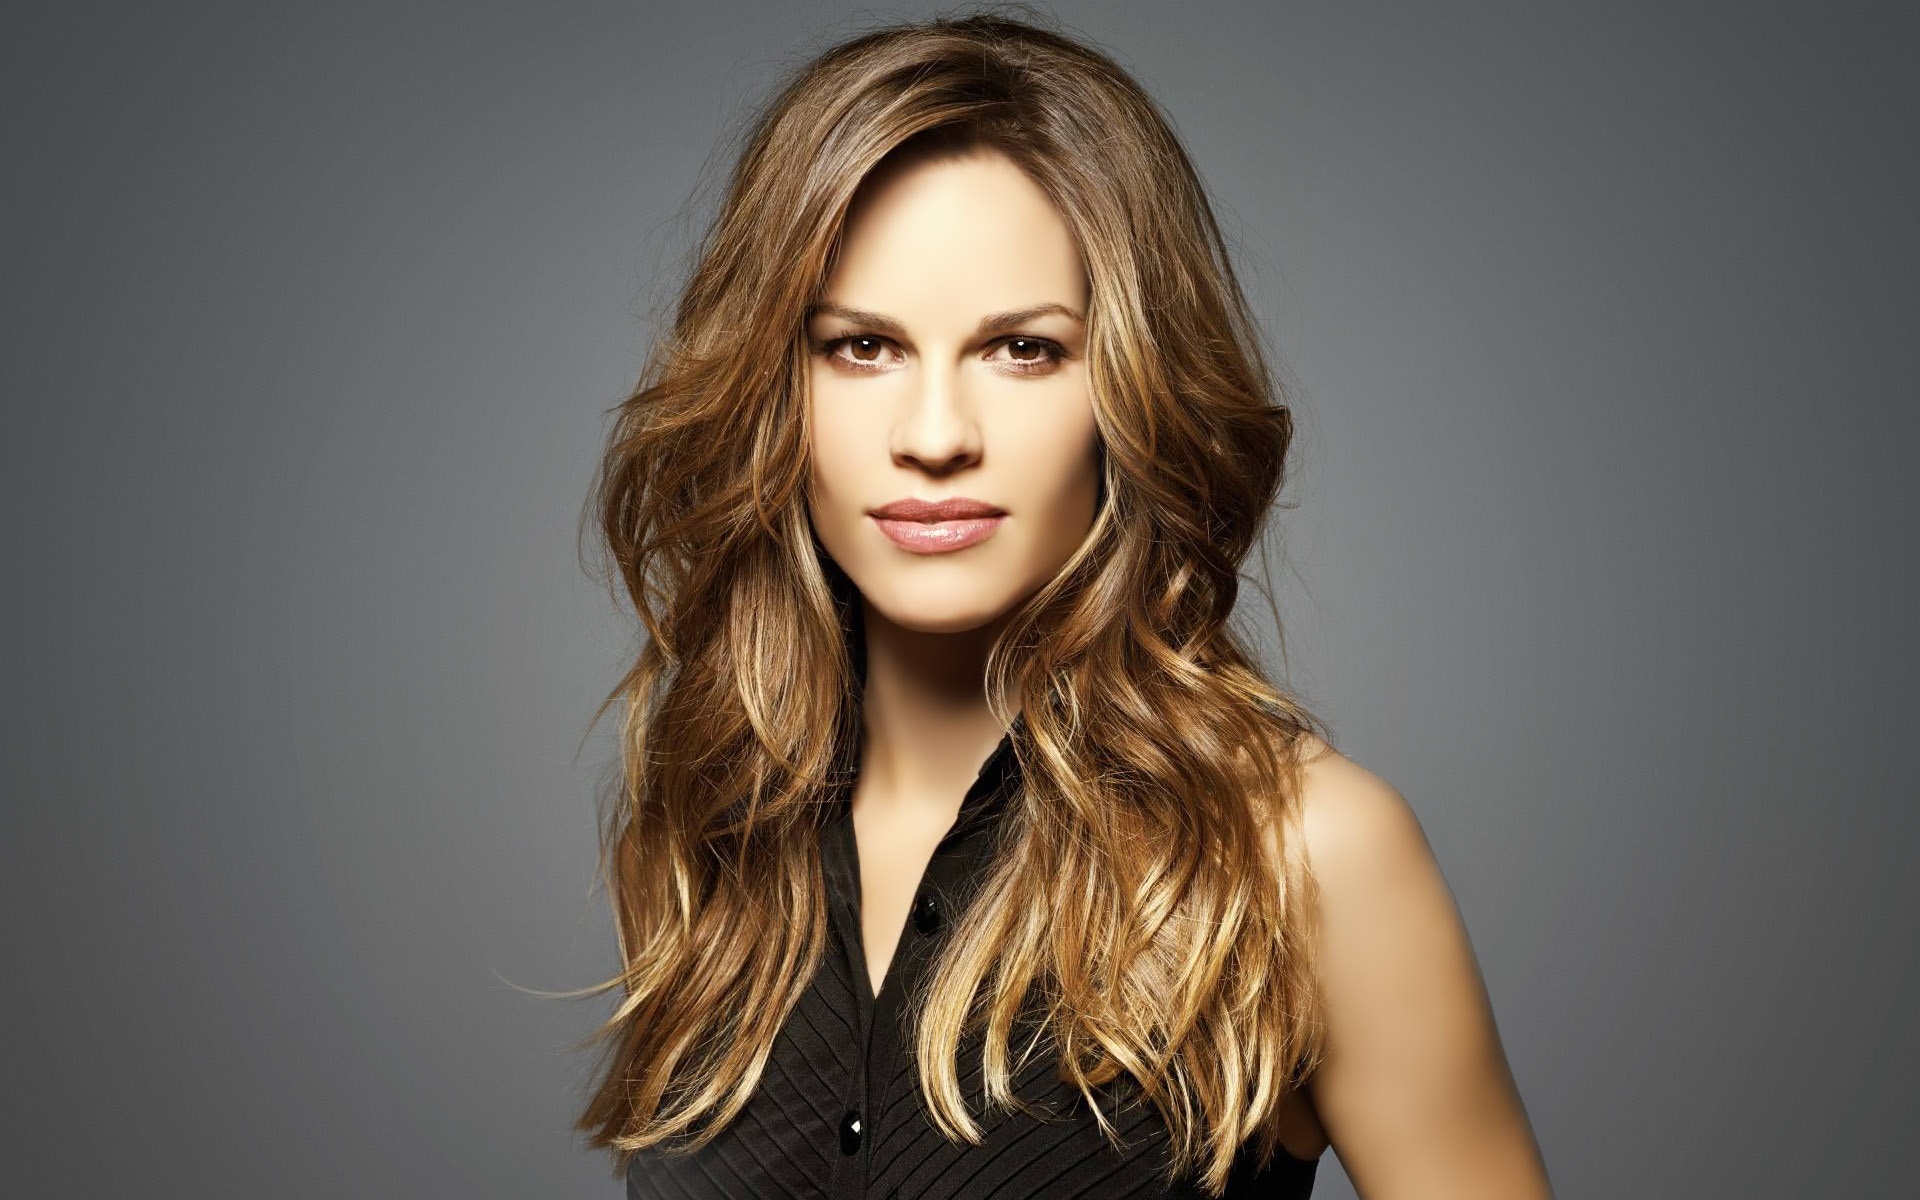 Hilary Swank Arena Pile Top 10 Most Beautiful Tomboy Actresses In The World